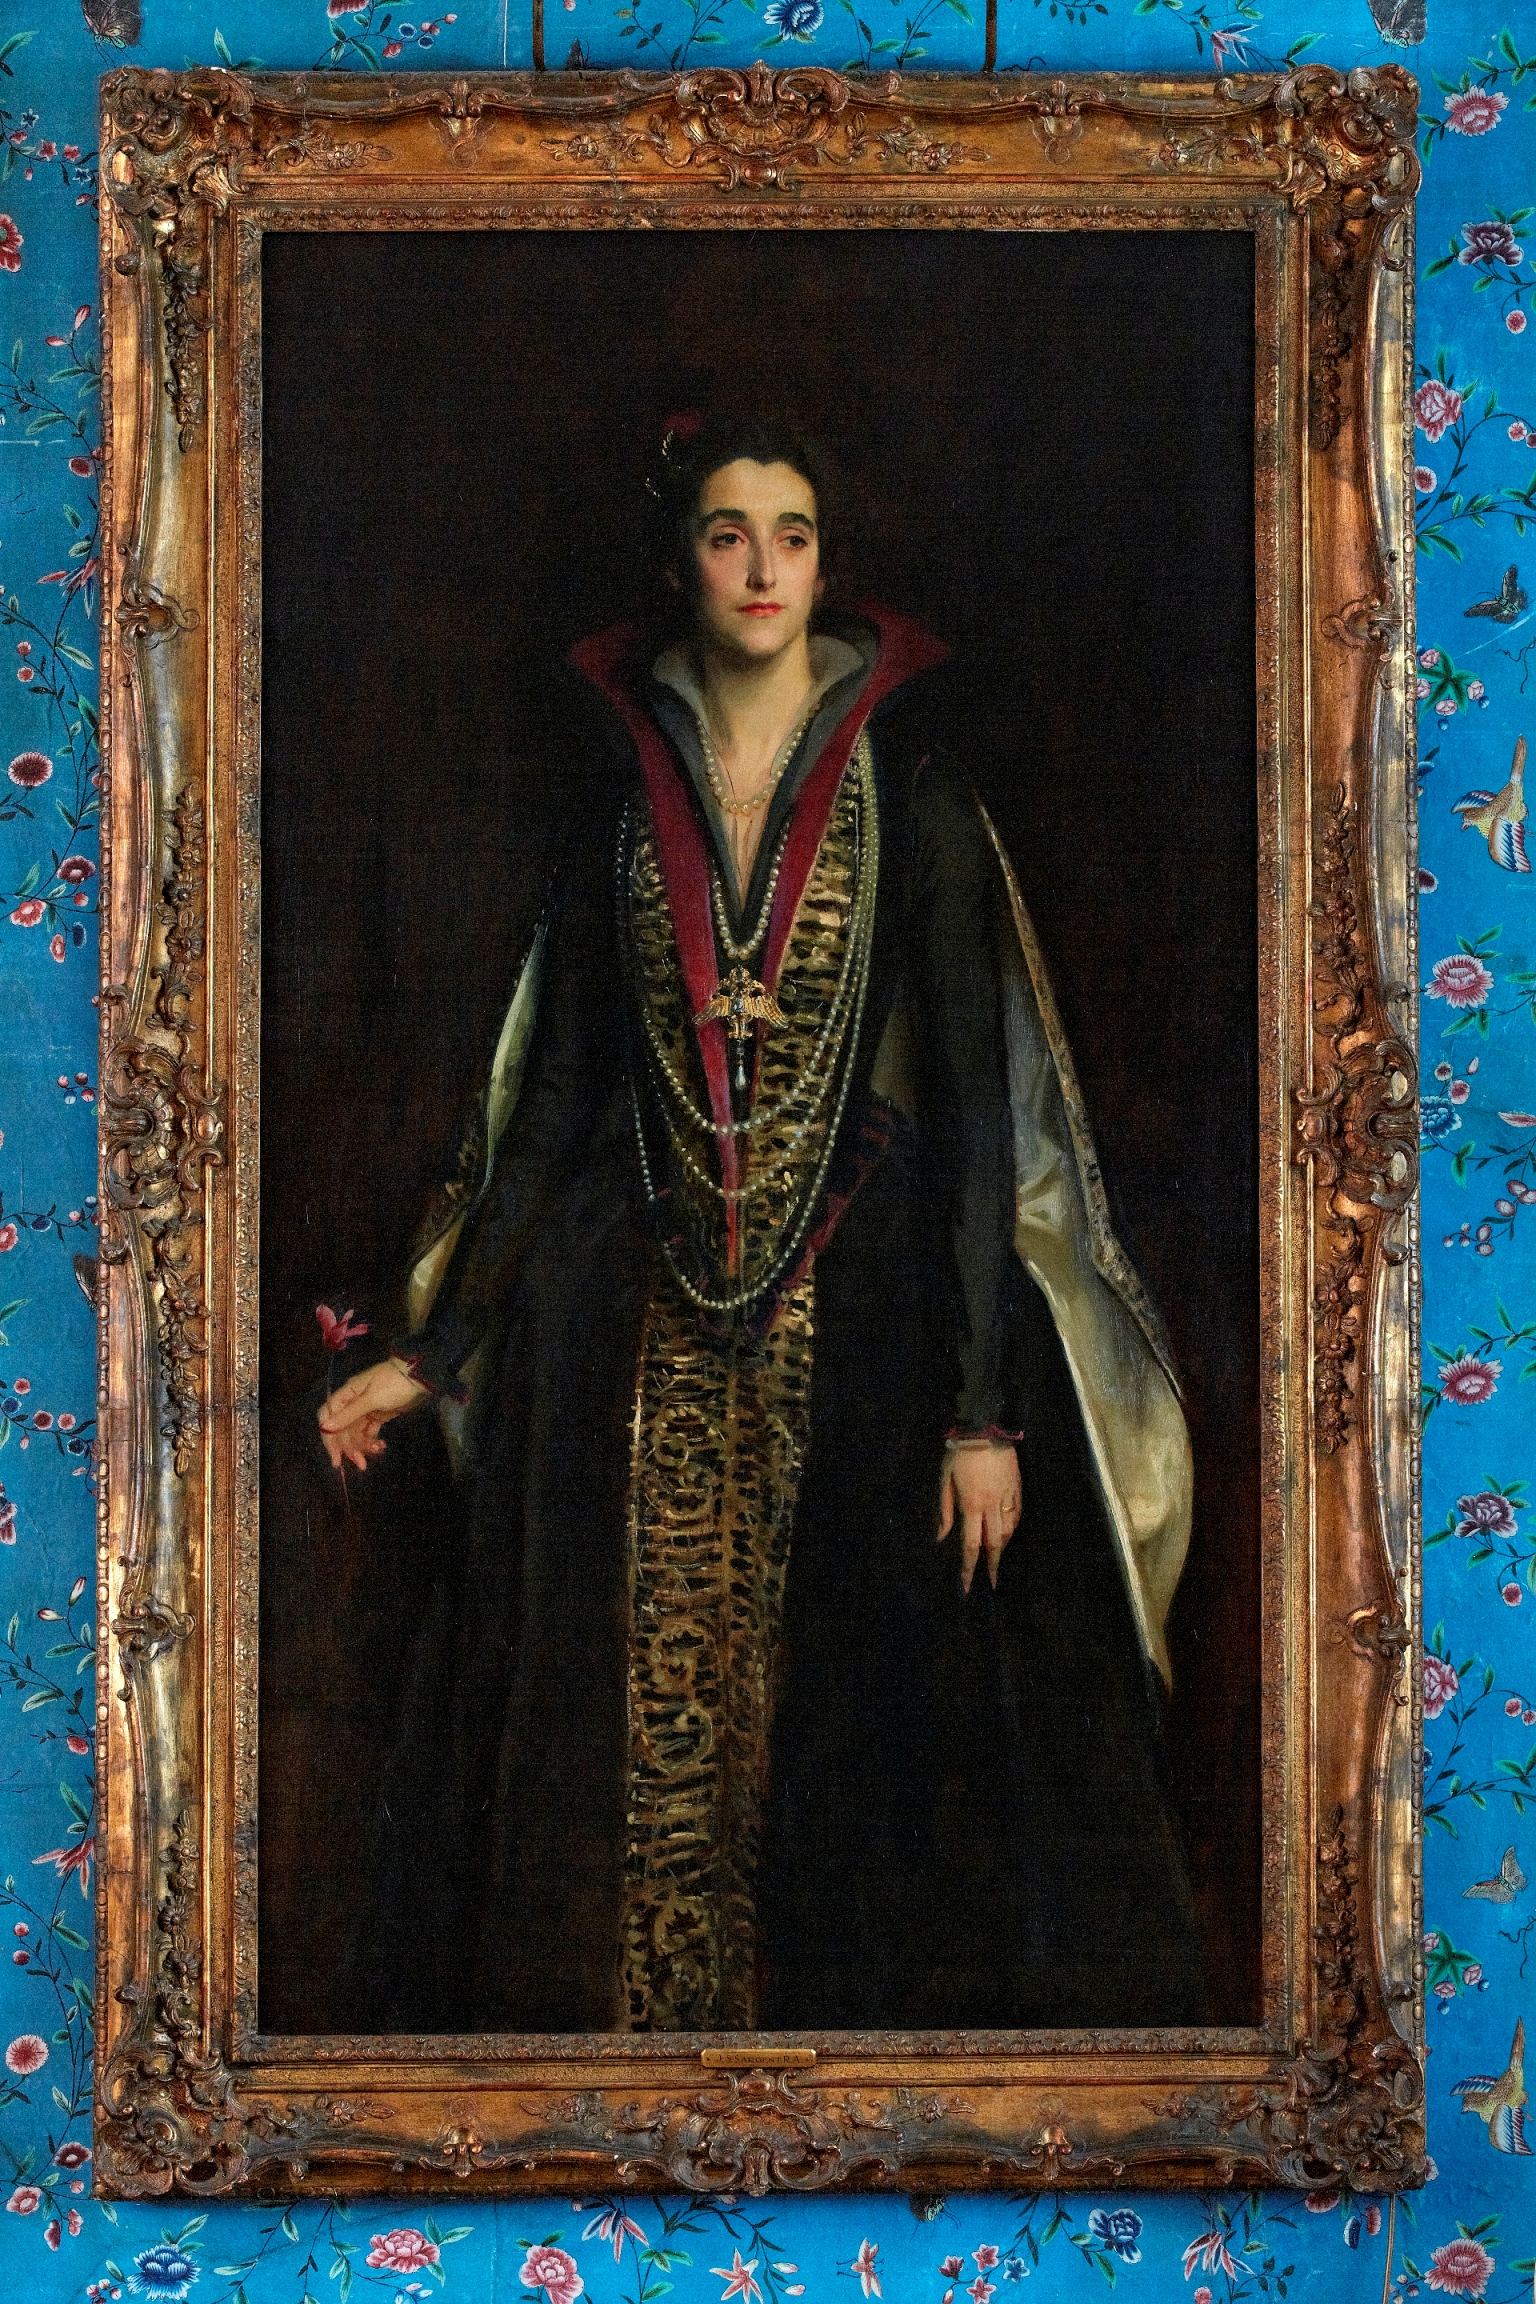 John Singer Sargent (1856-1925), Portrait of the Marchioness of Cholmondeley, 1922. Oil on canvas; 161 x 93 cm. Private Collection. © Photo: